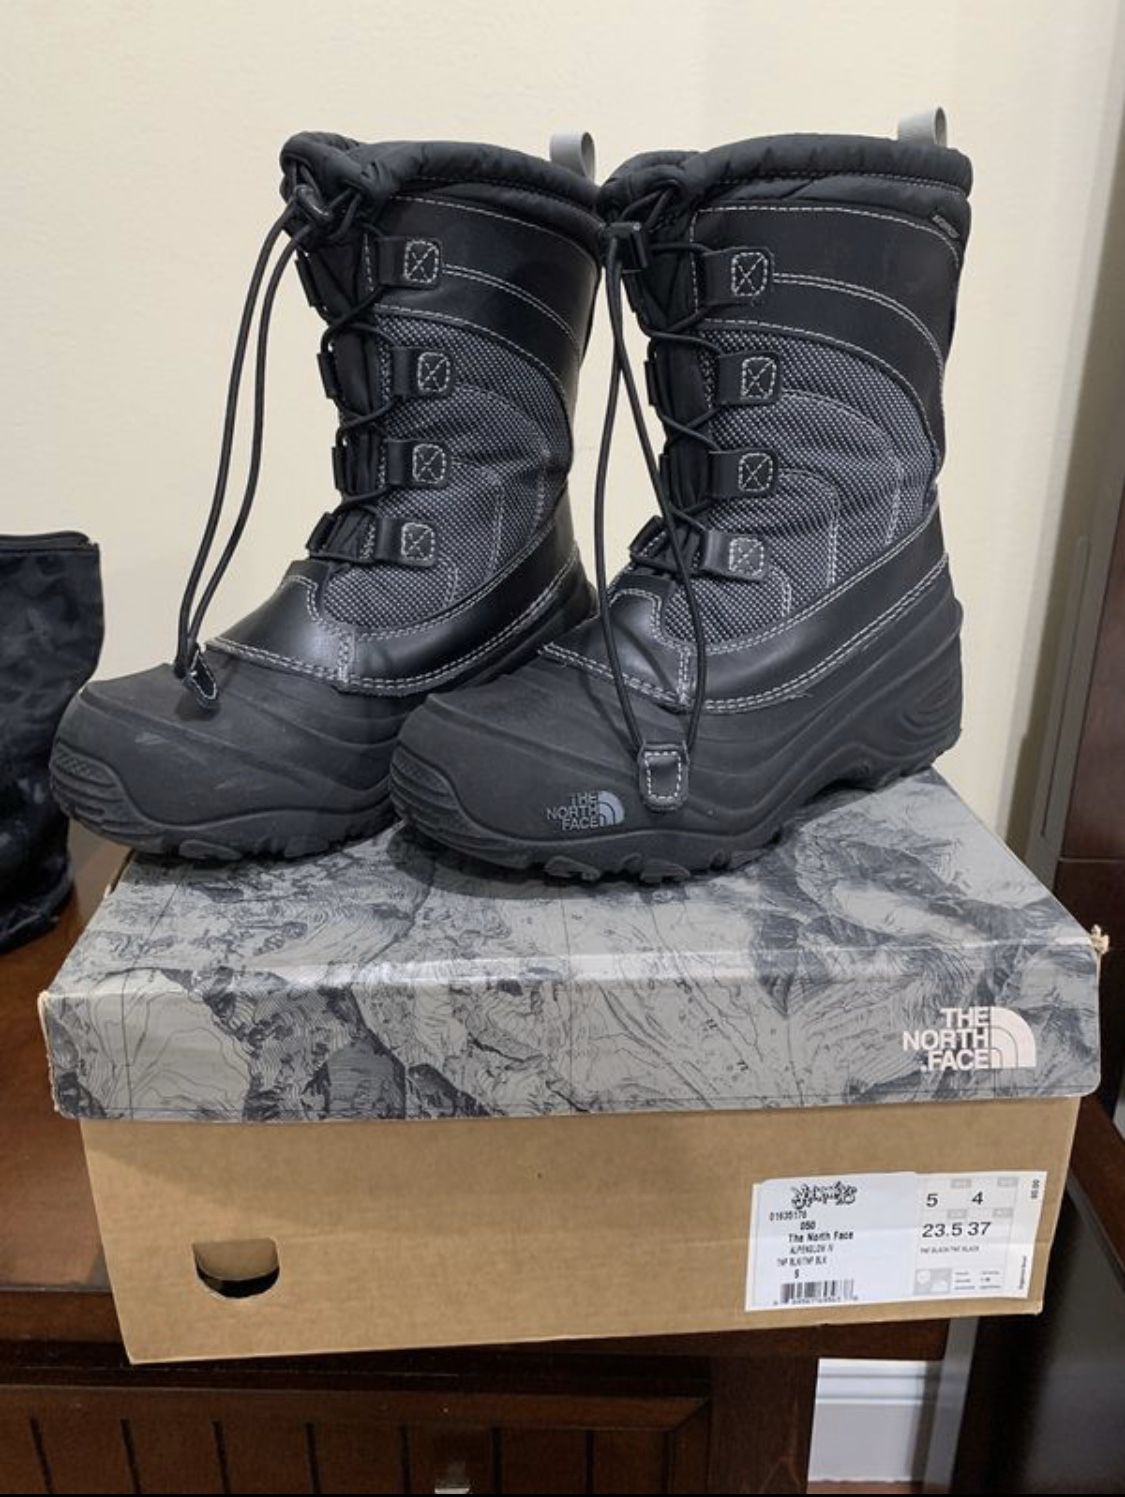 Kids north face winter/snow boots size 5, $20